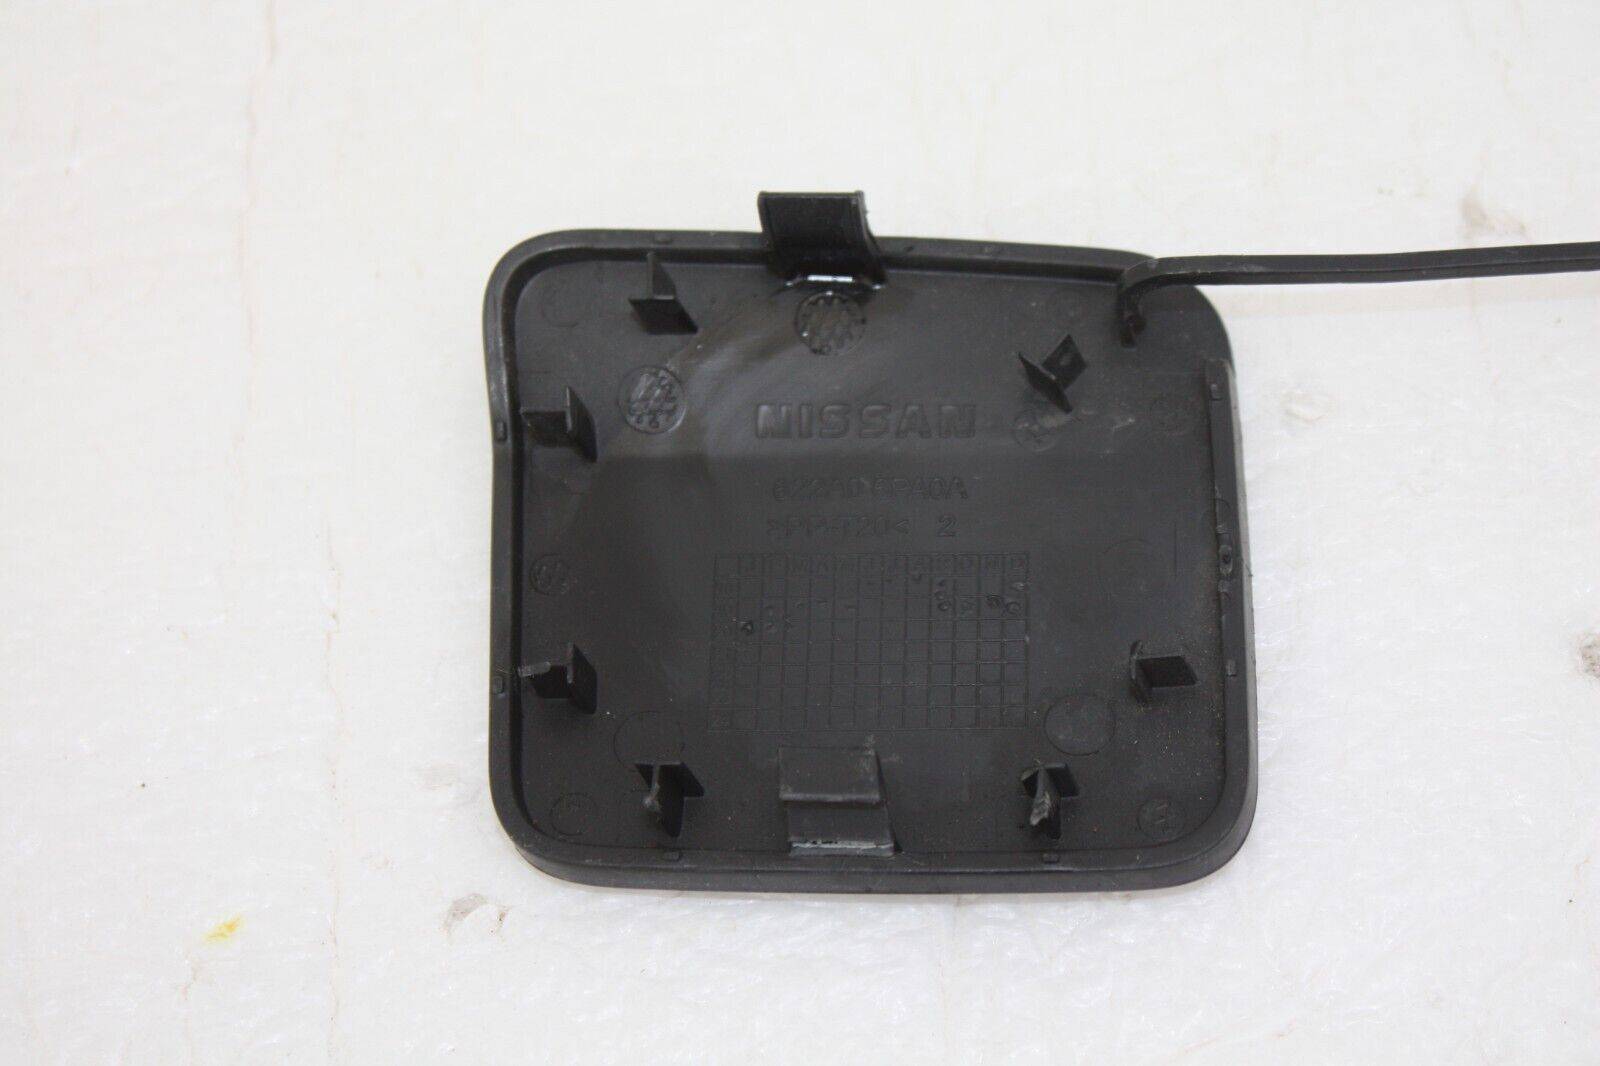 Nissan-Juke-Front-Bumper-Tow-Cover-622A0-6PA0A-Genuine-176412609508-12